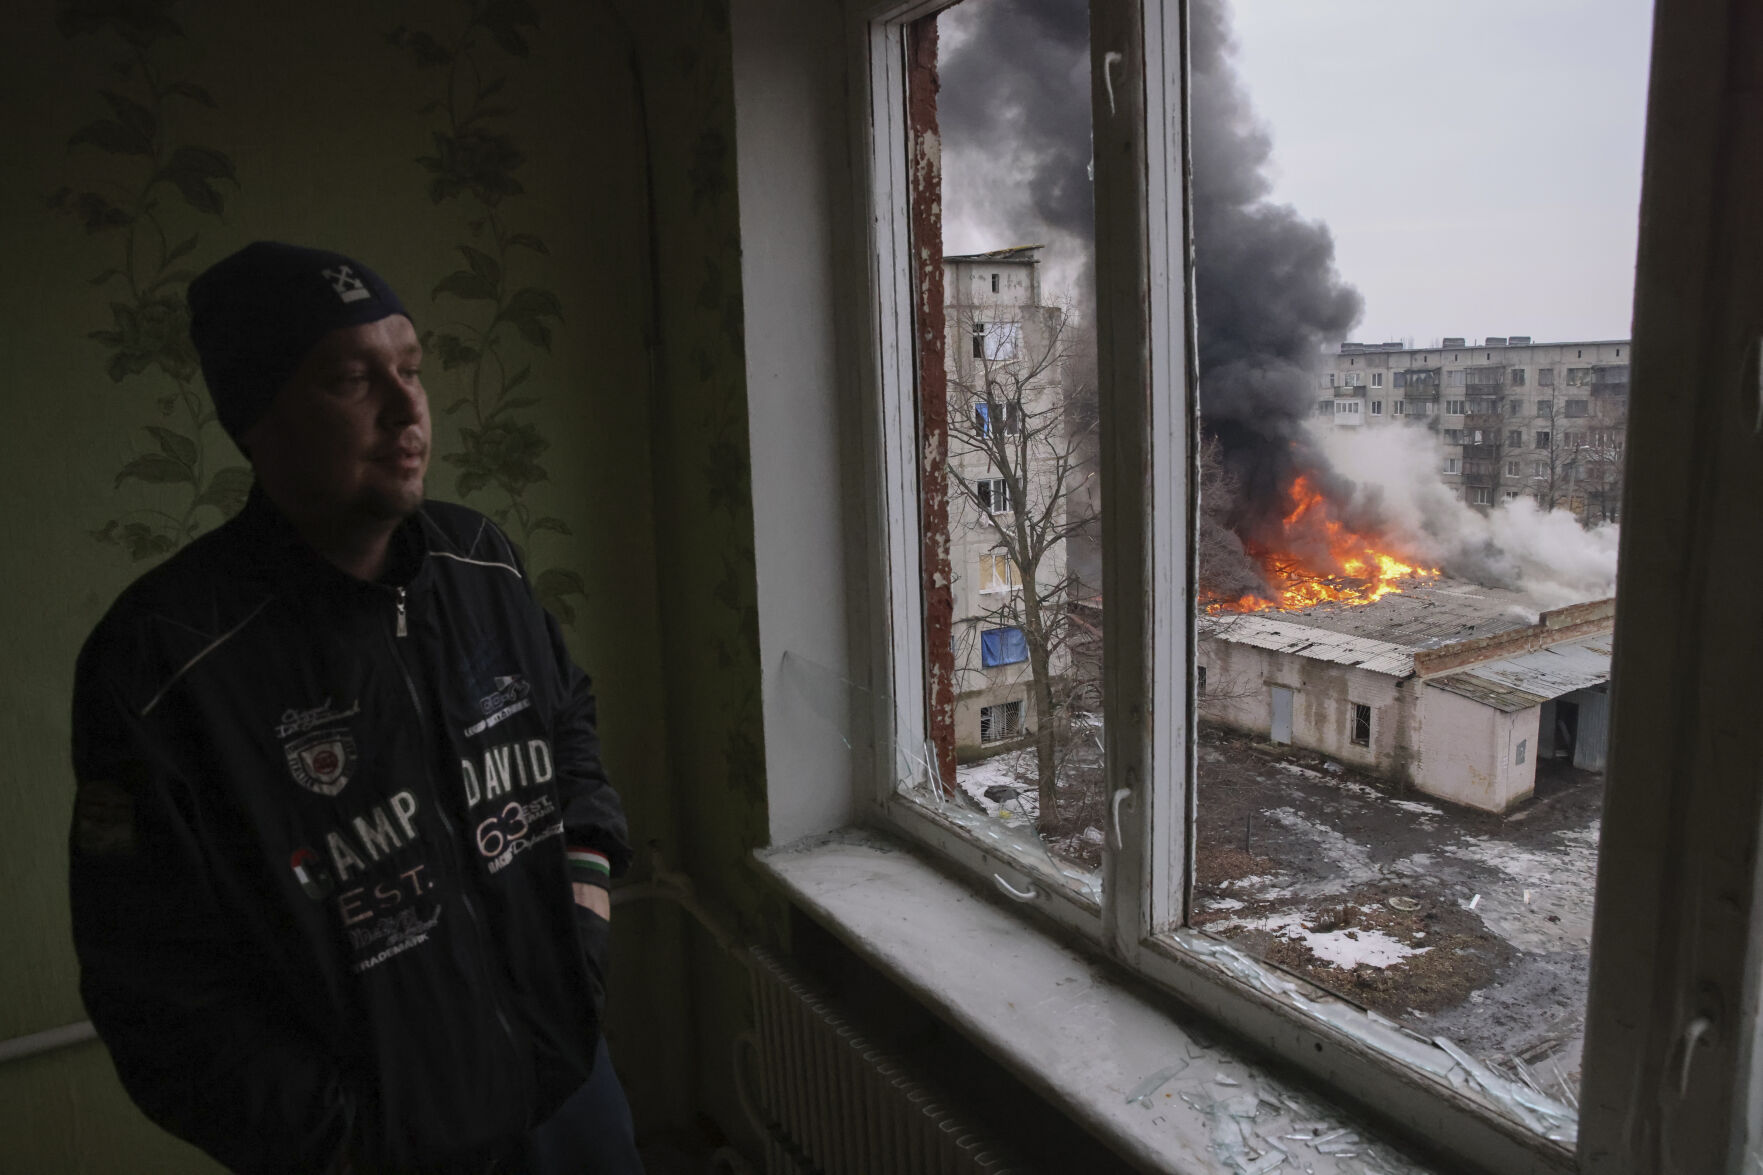 <p>A local resident stands at the window as smoke raises from the burning building after the Russian shelling in the town of Chasiv Yar, the site of the heaviest battles with the Russian troops, Donetsk region, Ukraine, Monday, Feb. 27, 2023. (AP Photo/Yevhen Titov)</p>   PHOTO CREDIT: Yevhen Titov - stringer, AP